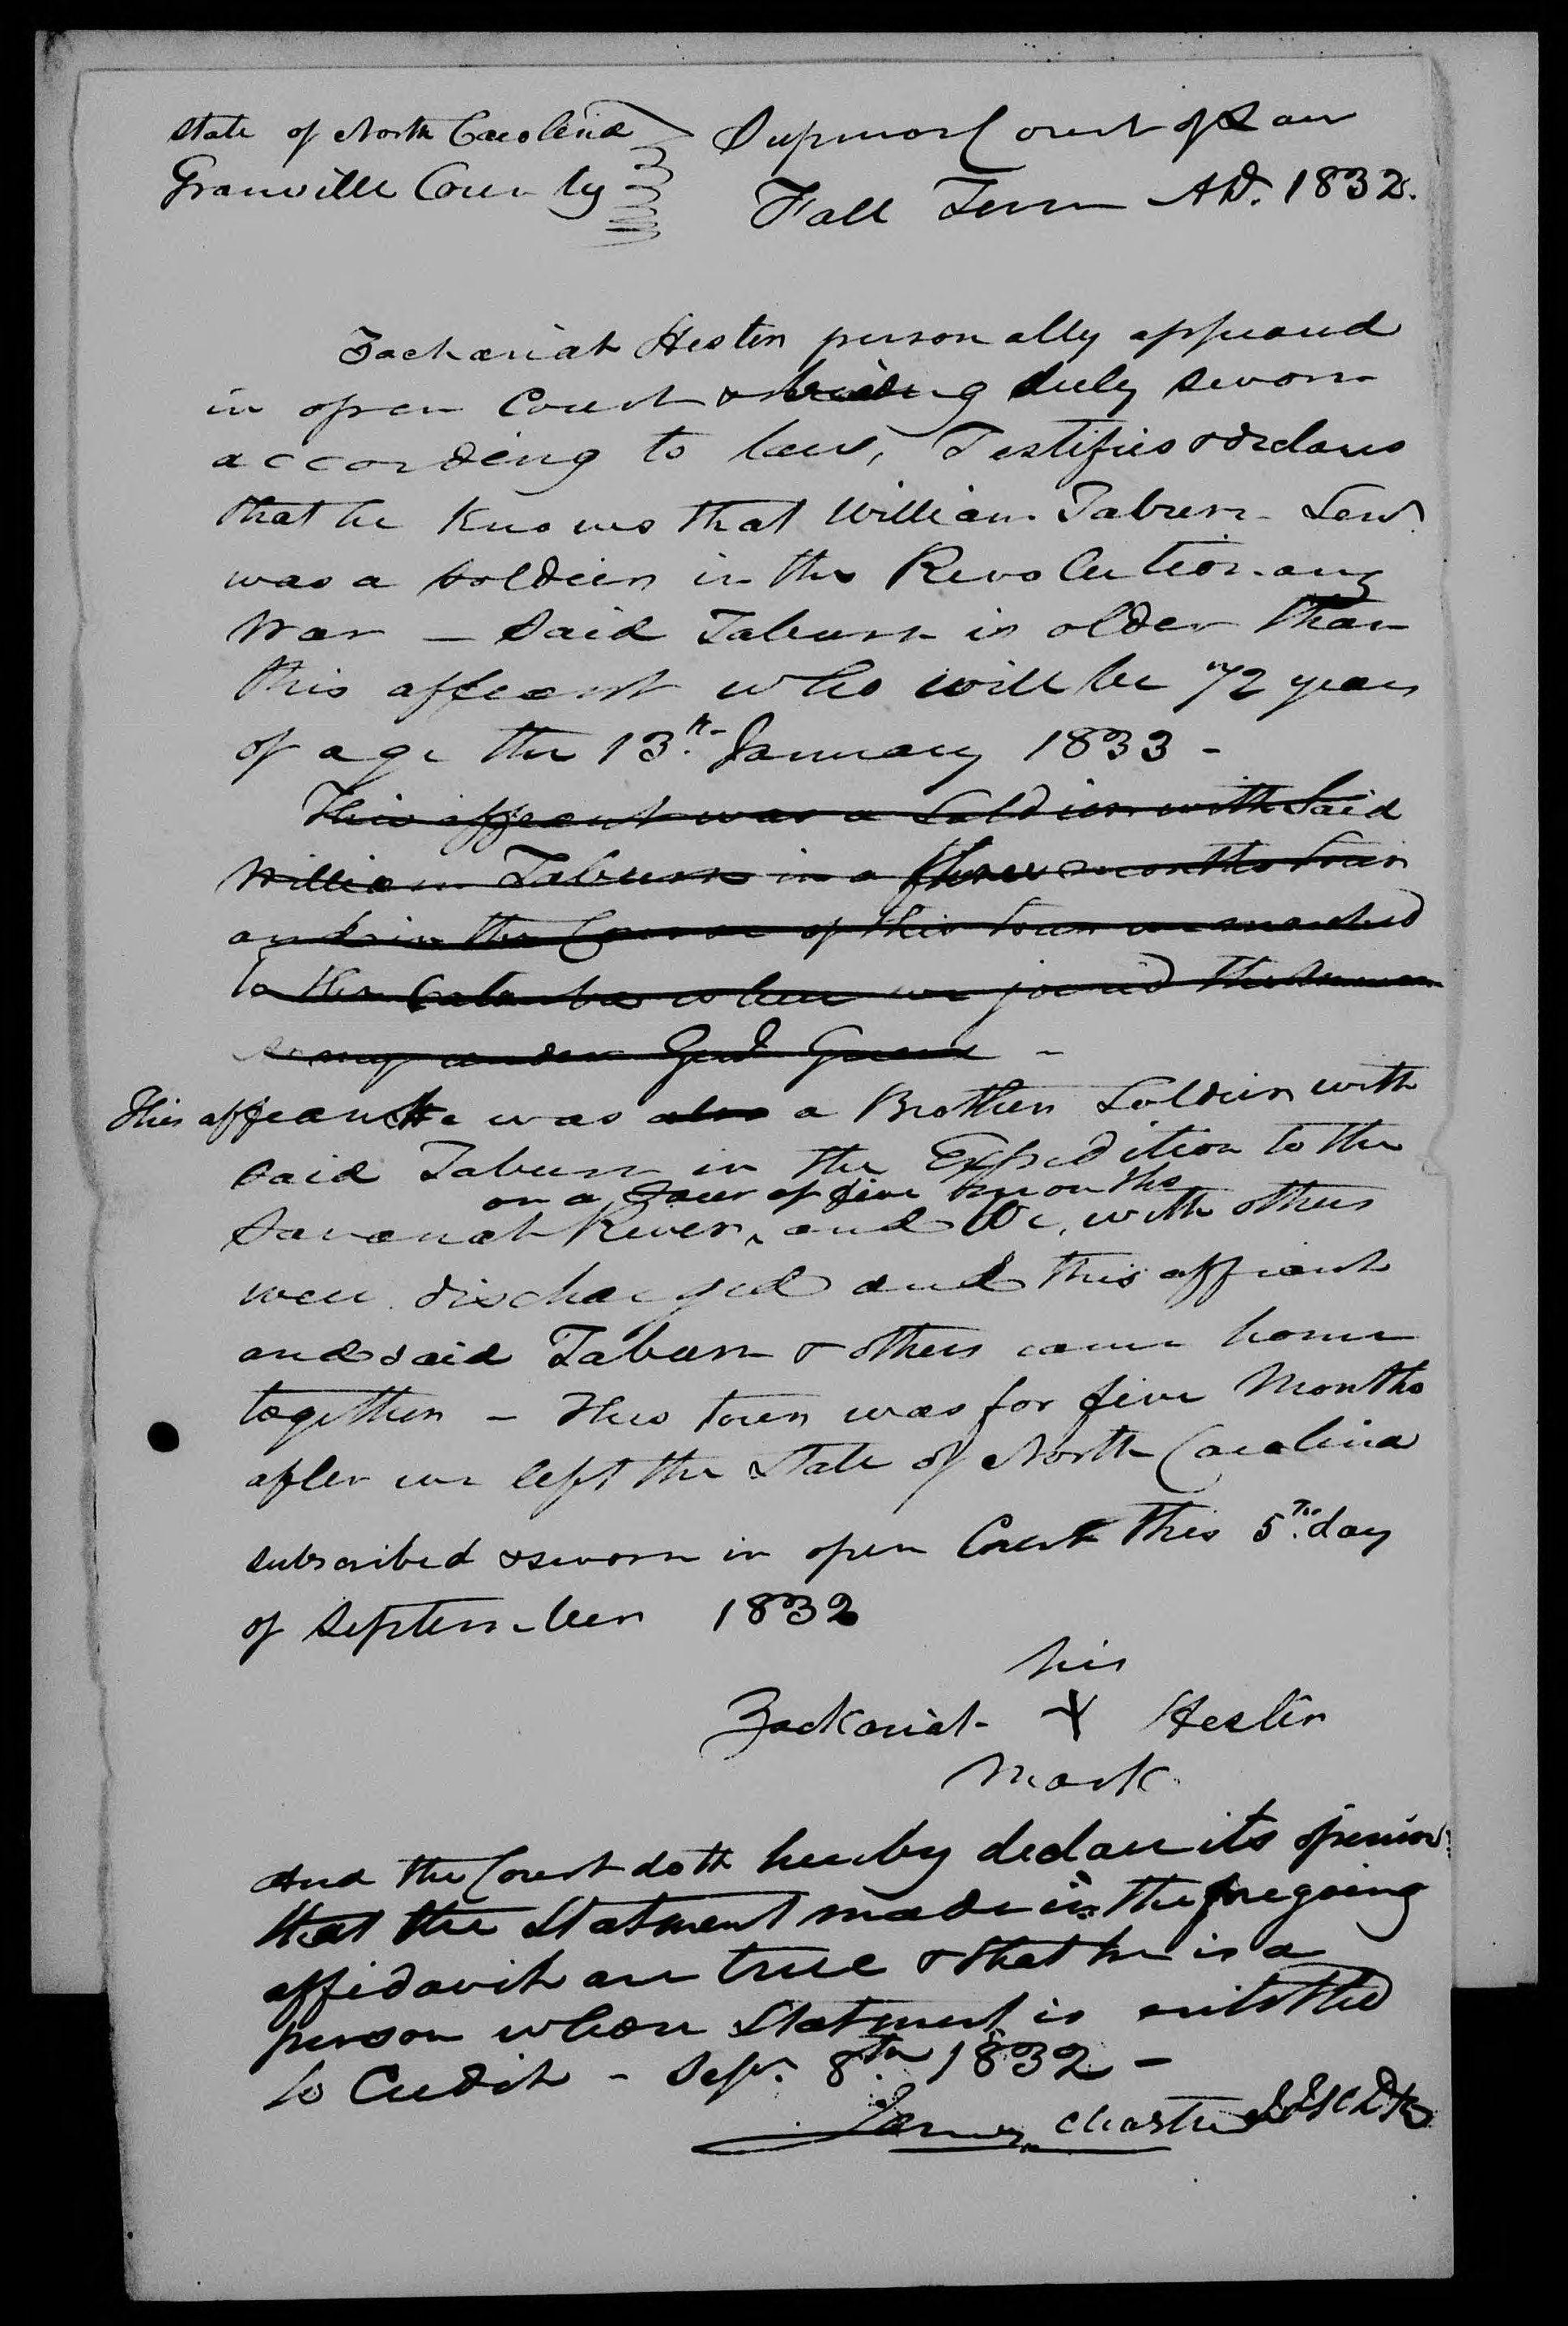 Affidavit of Zachariah Hester in support of a Pension Claim for William Taburn, 5 September 1832, page 1